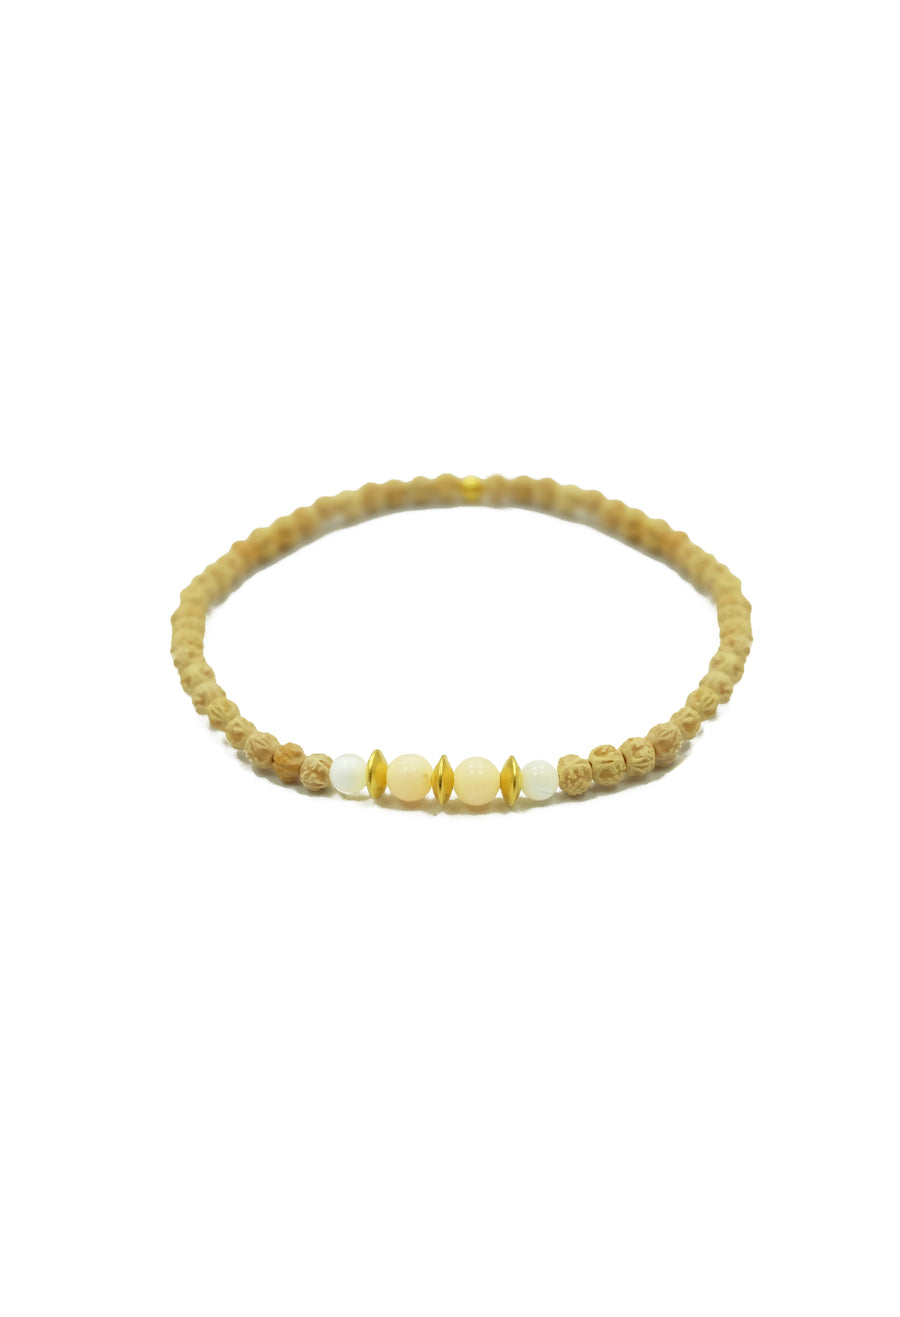 A mesmerizing Uluwatu Moon Bracelet, featuring 2mm rudrani seeds, pink coral, and moonstone beads, adorned with a stunning pearl pendant and 22k gold accents. Inspired by the full-moon casting a radiant runway onto the waves of Uluwatu Beach, this celestial accessory evokes beachside meditations and invites you to trust in the magnificence of the cosmos.